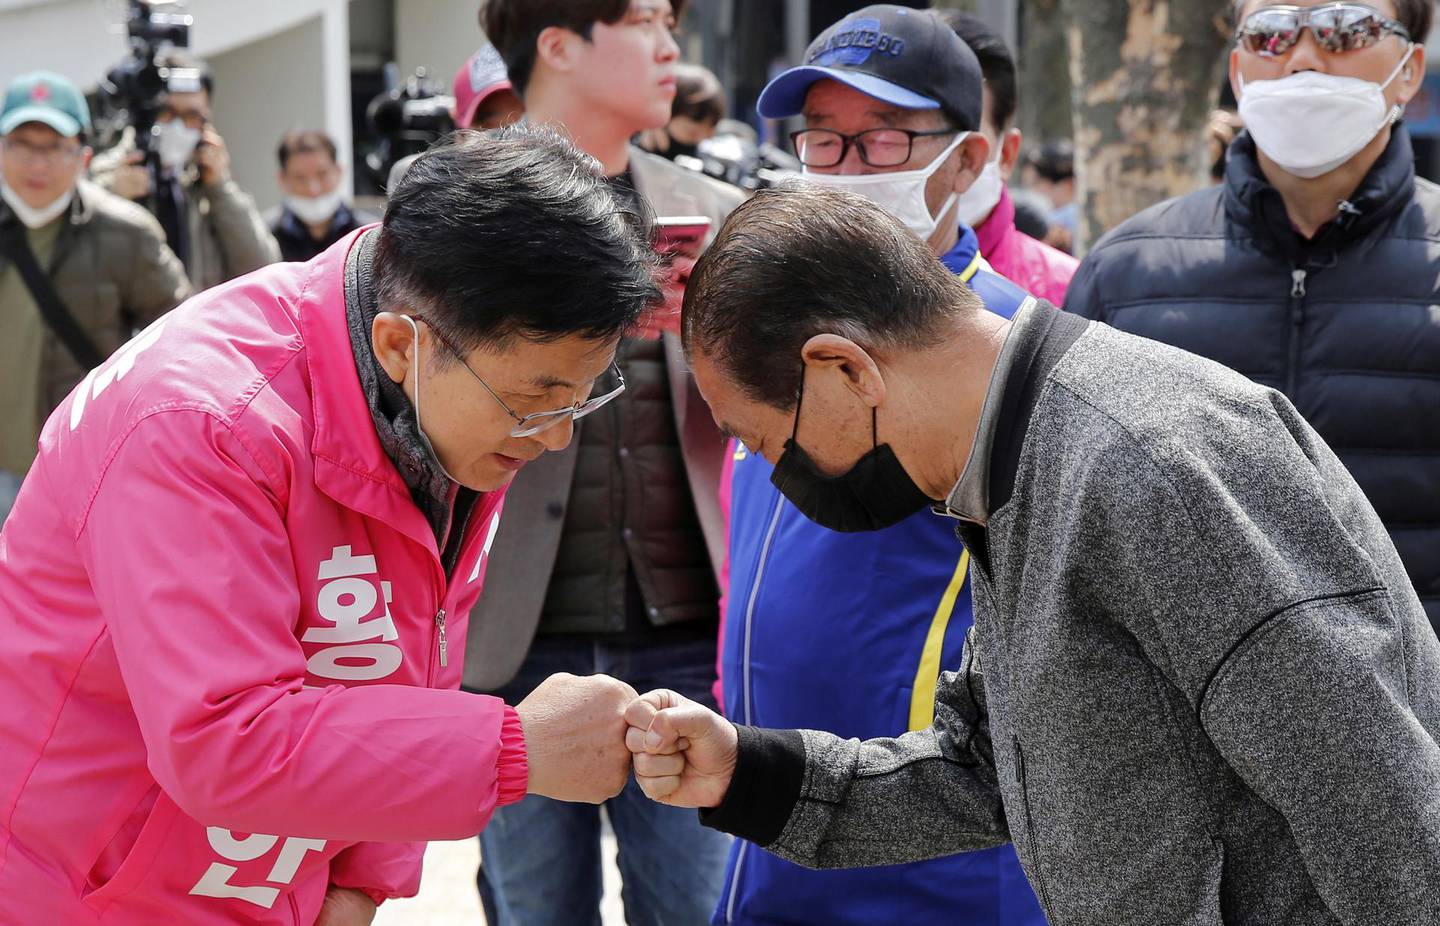 Hwang Kyo-ahn, a candidate of the main opposition United Future Party, gives a fist bump instead of shaking hands to avoid the spread of the coronavirus disease (COVID-19) during a campaign rally in Seoul,?South Korea, April 10, 2020.    REUTERS/Heo Ran